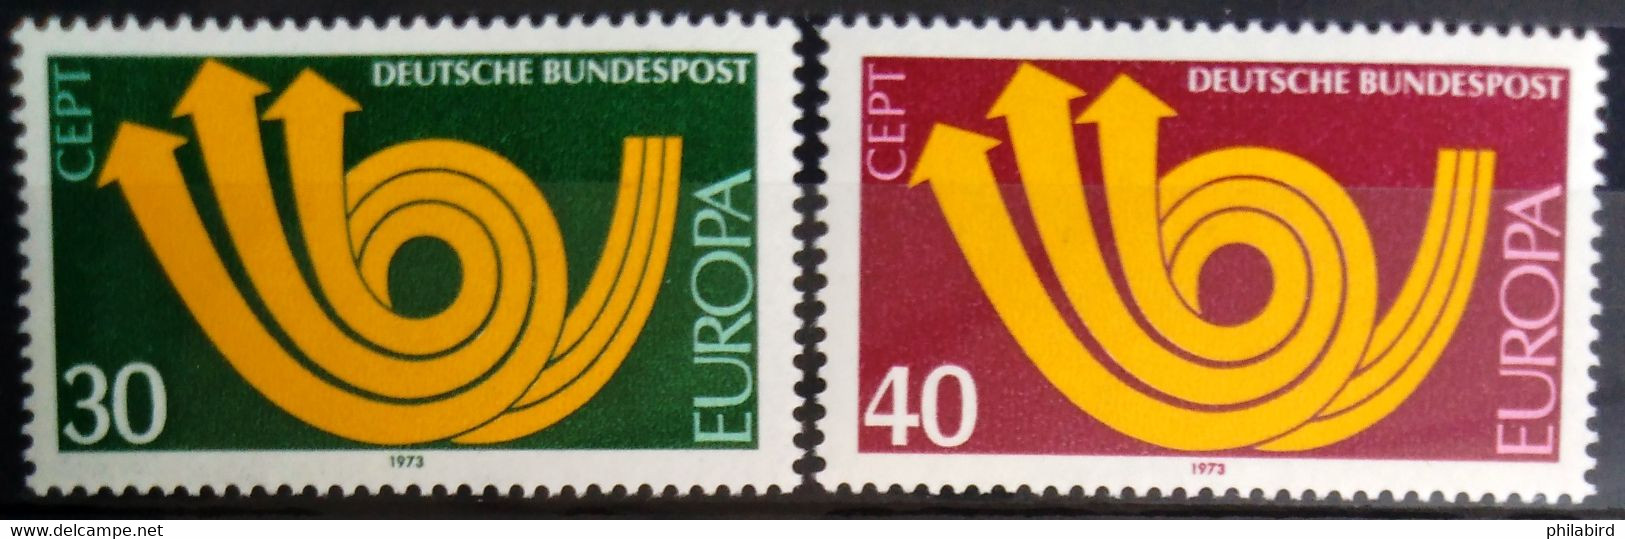 EUROPA 1973 - ALLEMAGNE                   N° 618/619                        NEUF** - 1973